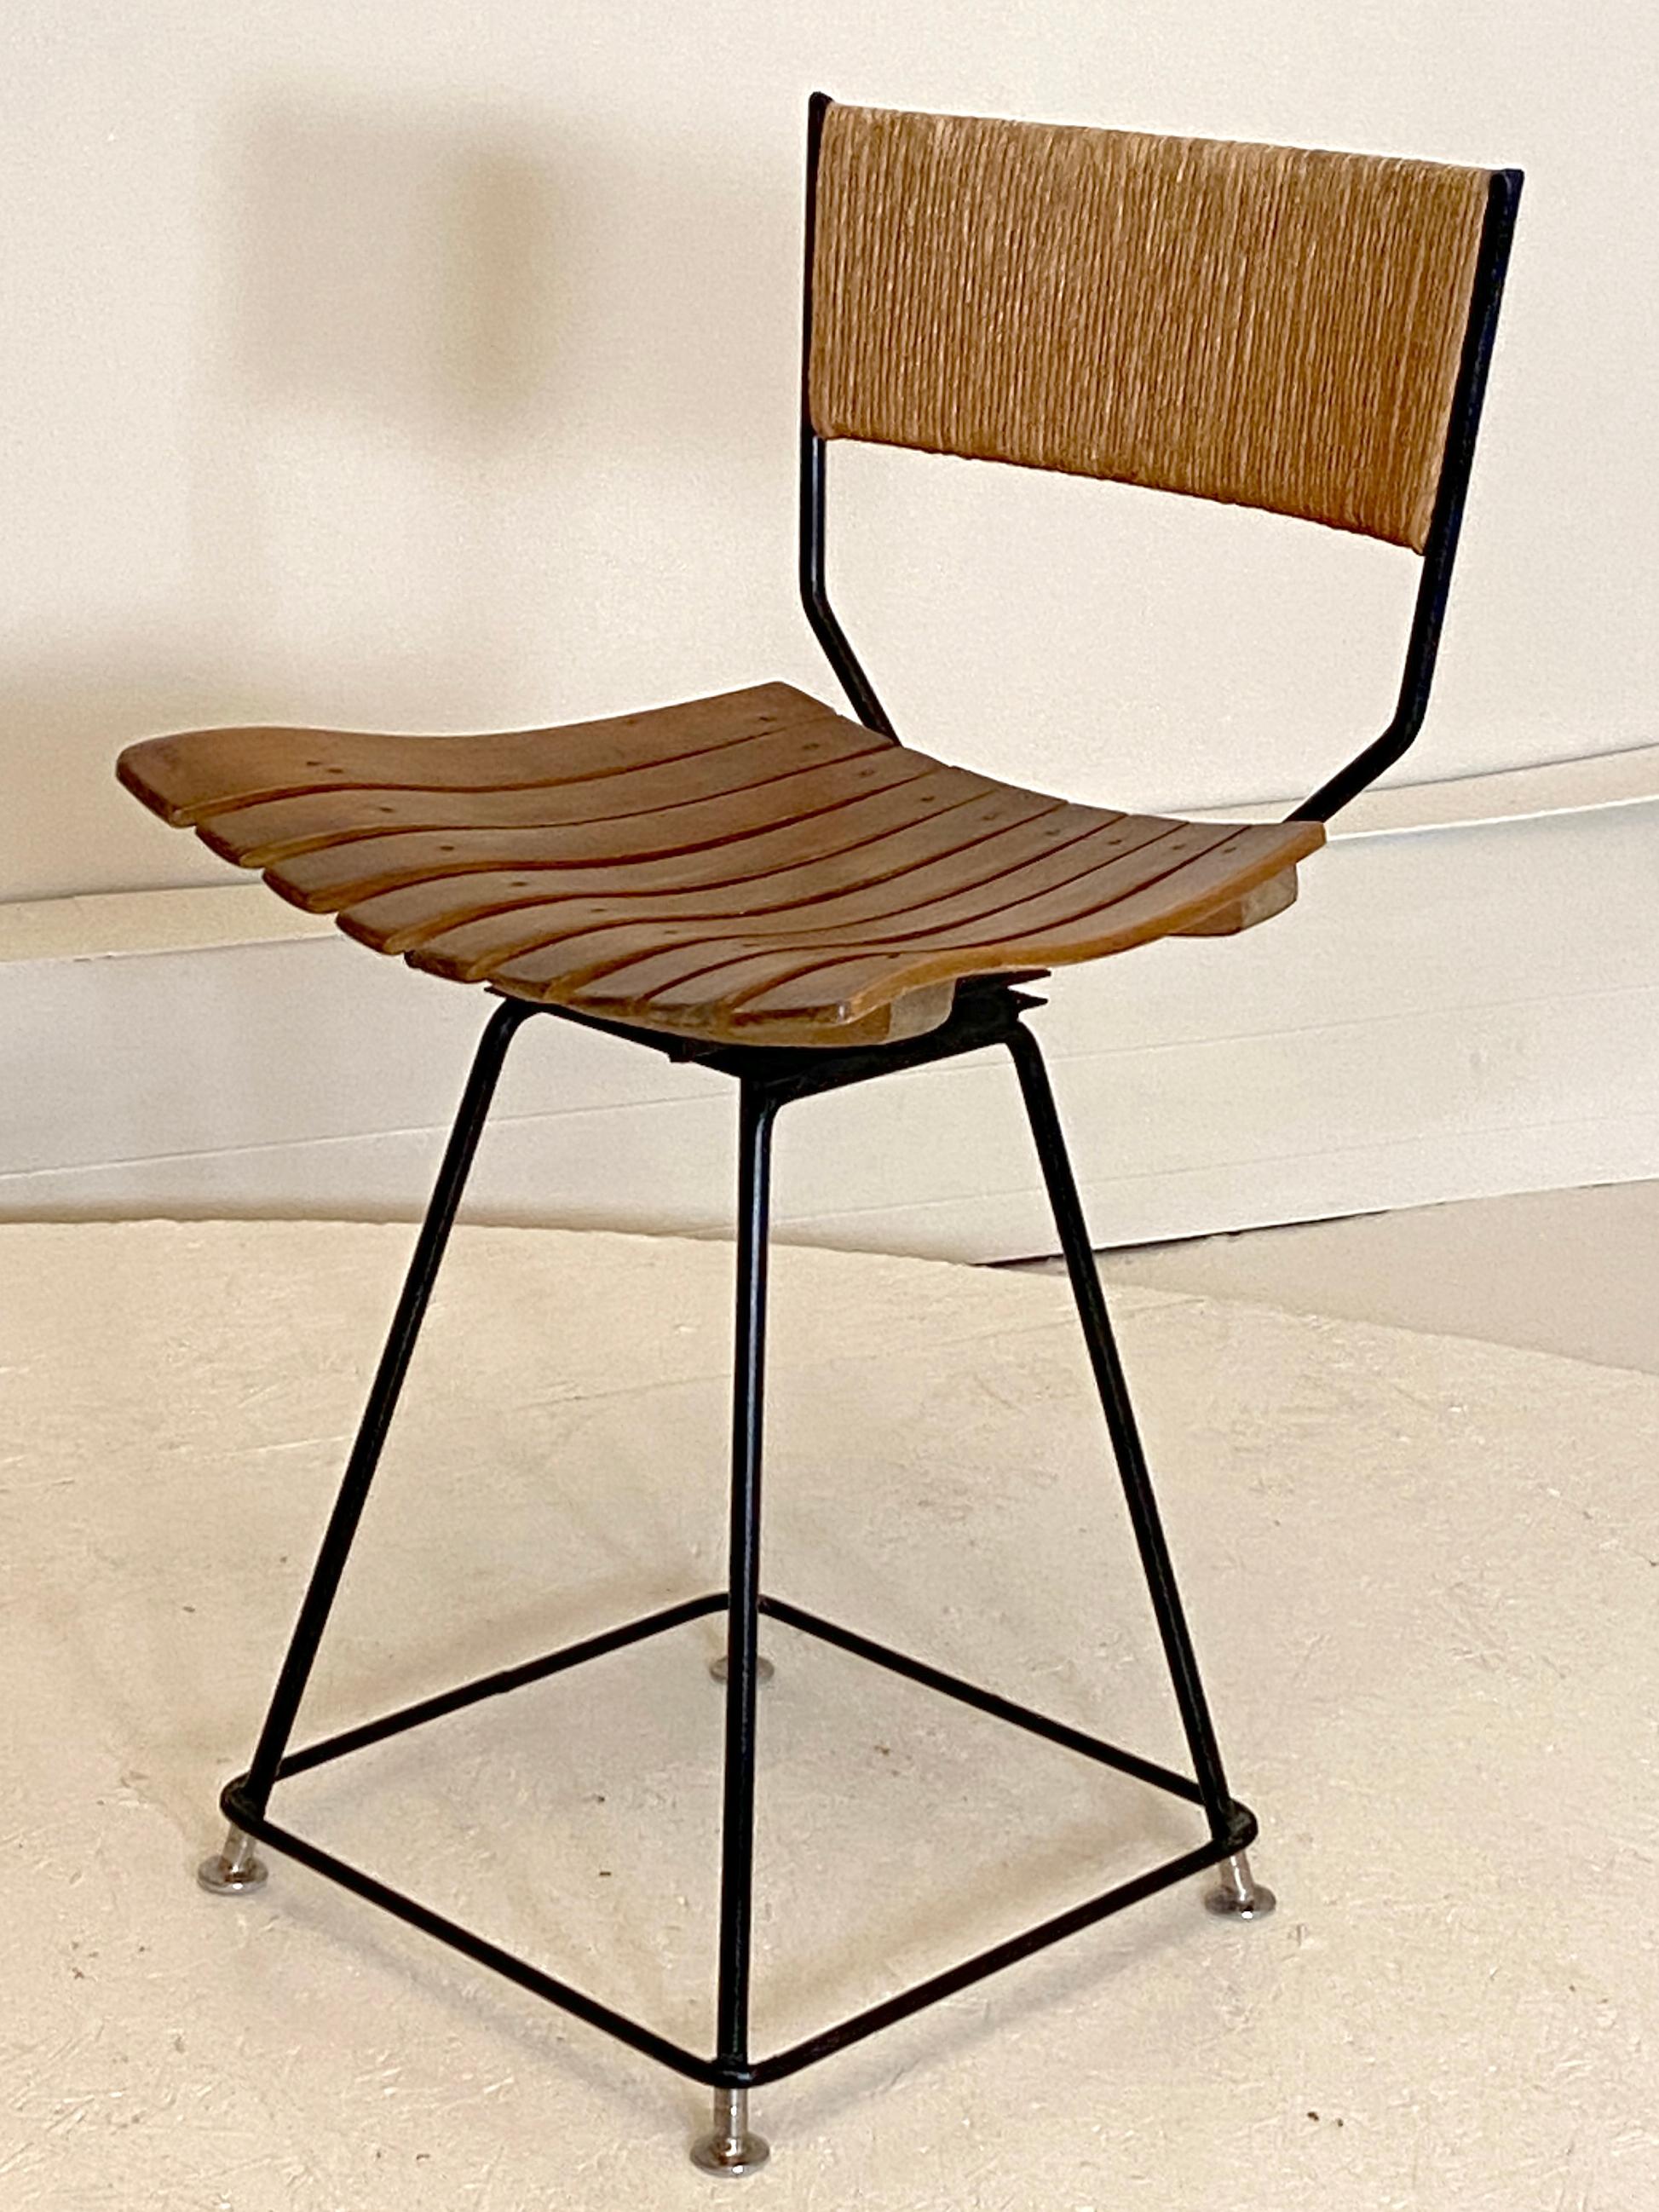 A very rare model from Arthur Umanoff. Special height chair believed to be used with his rush and birch desks he produced in the era. Note the stool seat height is 19-20